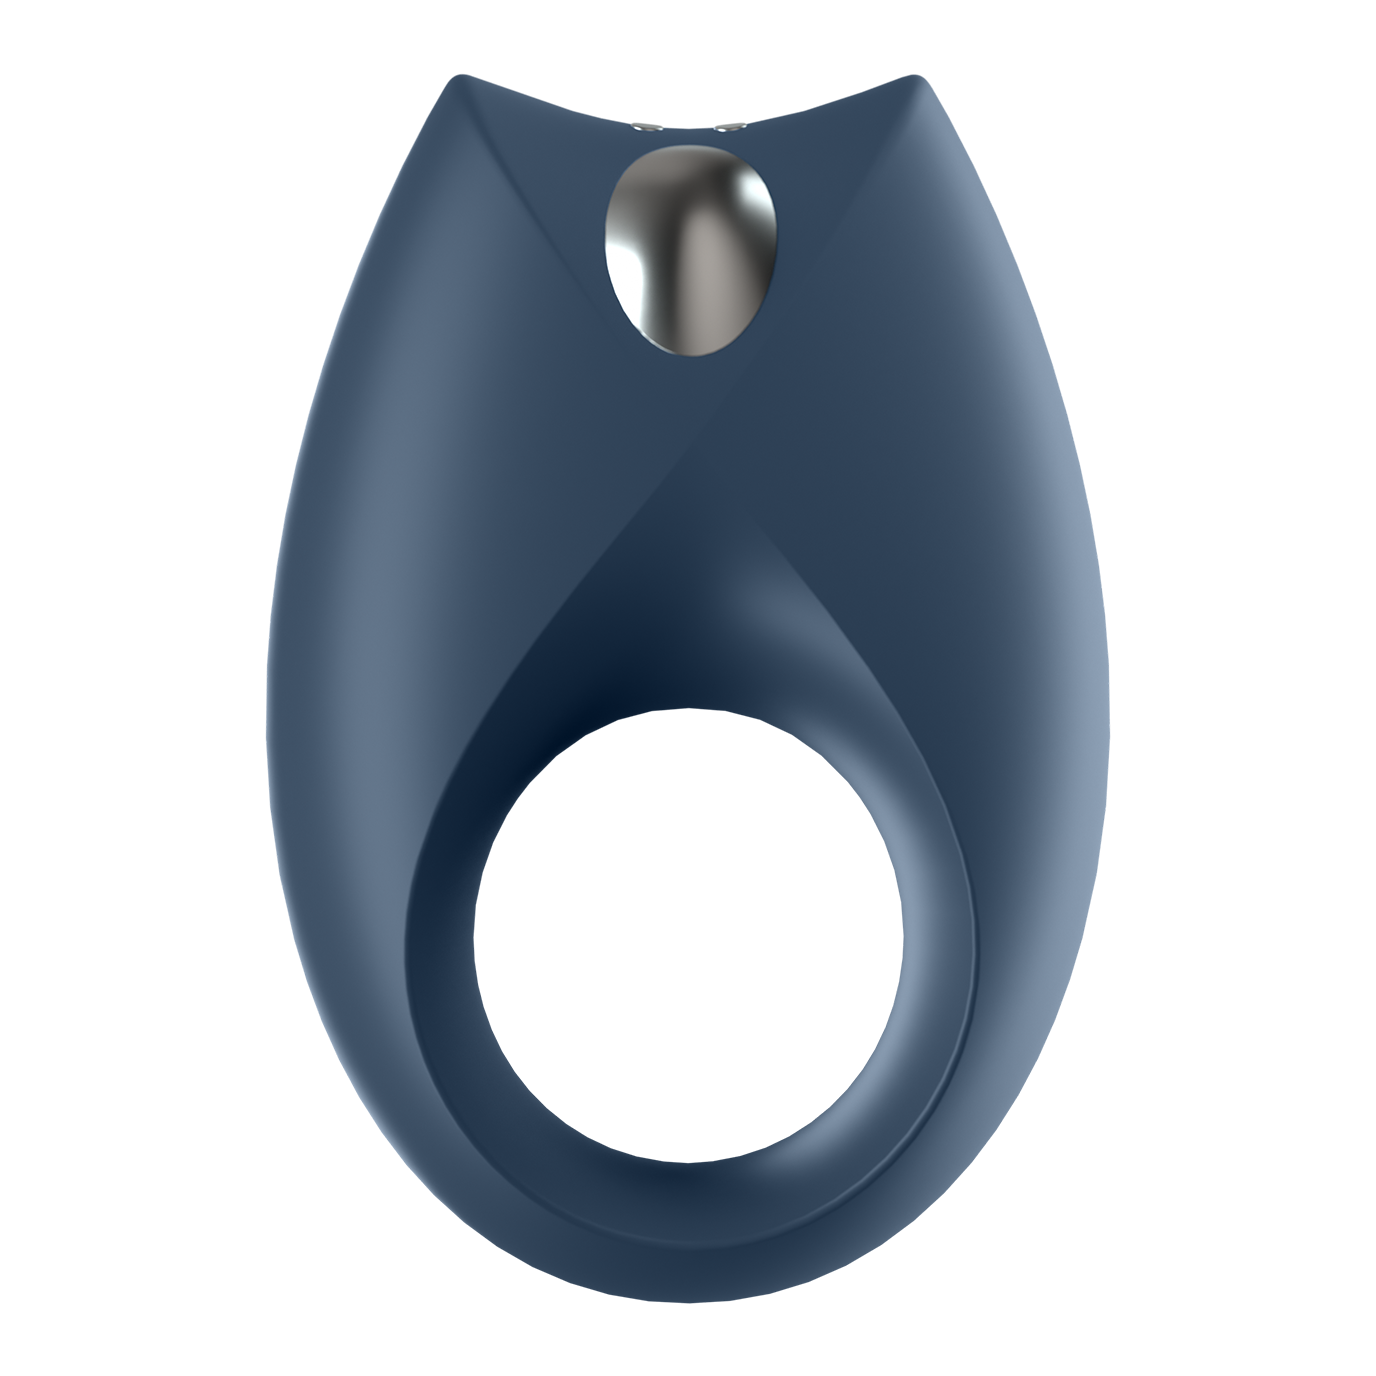 Royal One Connect App Silicone Penis Ring